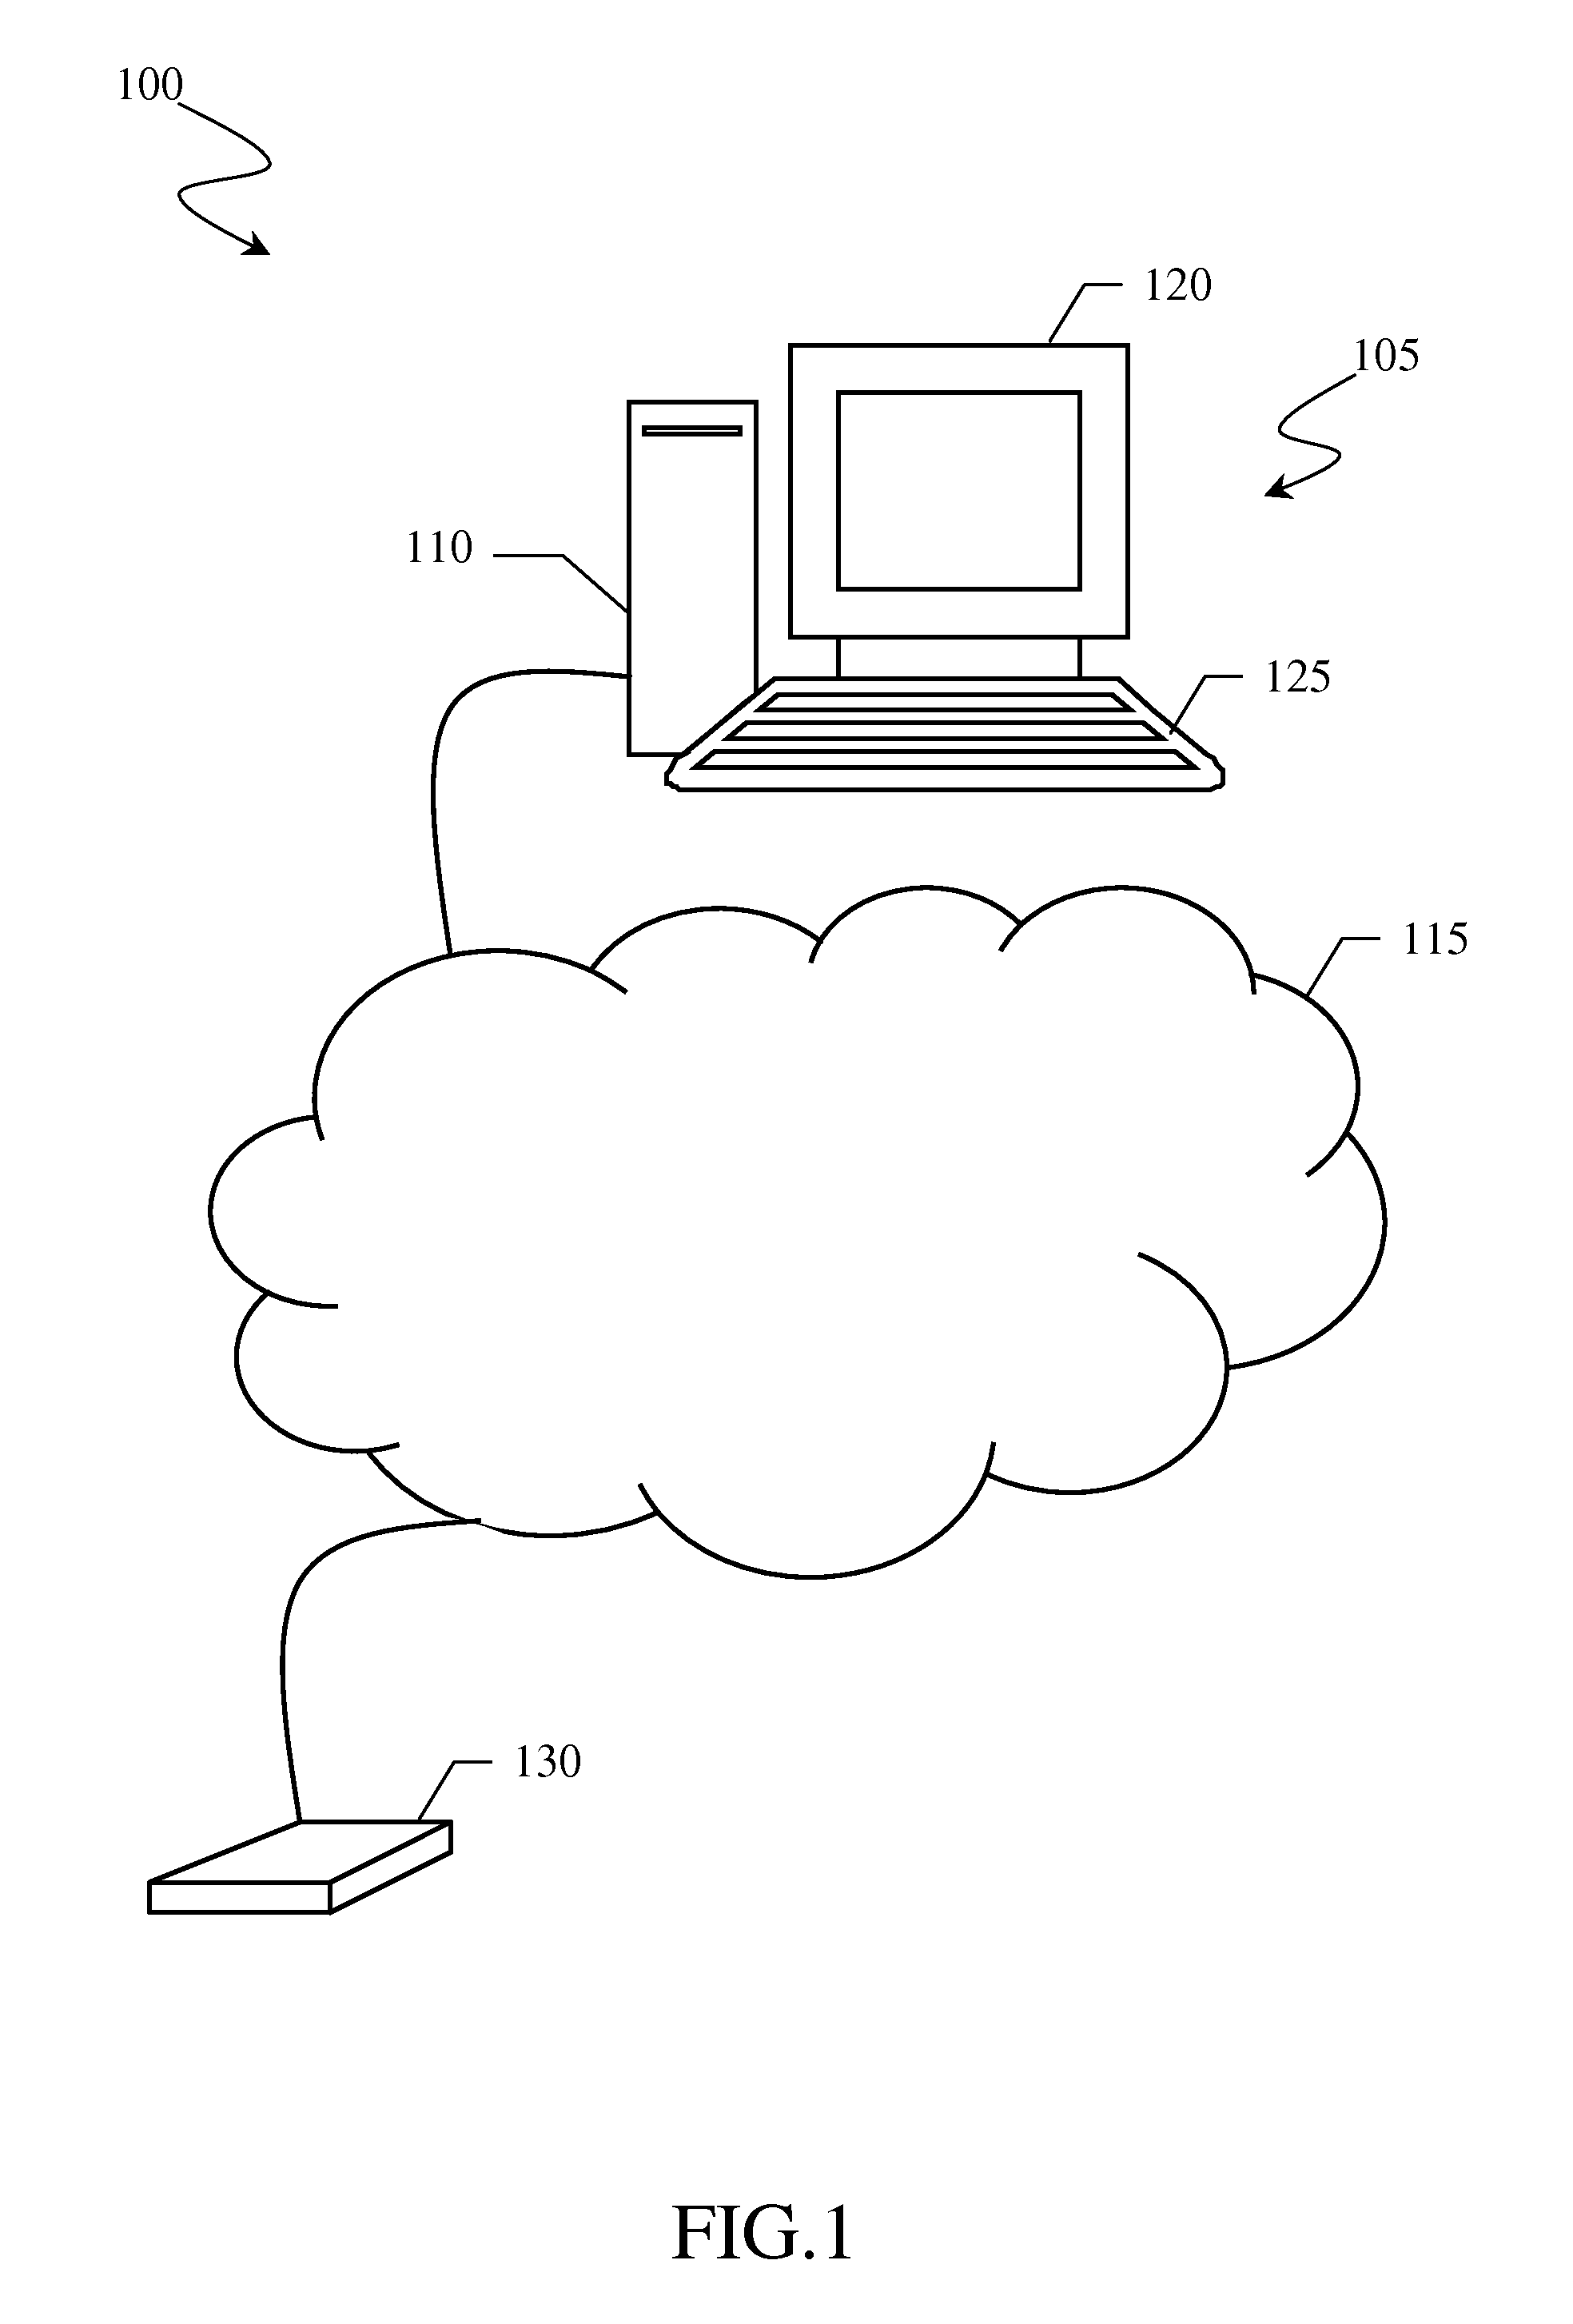 Method for the prediction of coverage areas of a cellular network